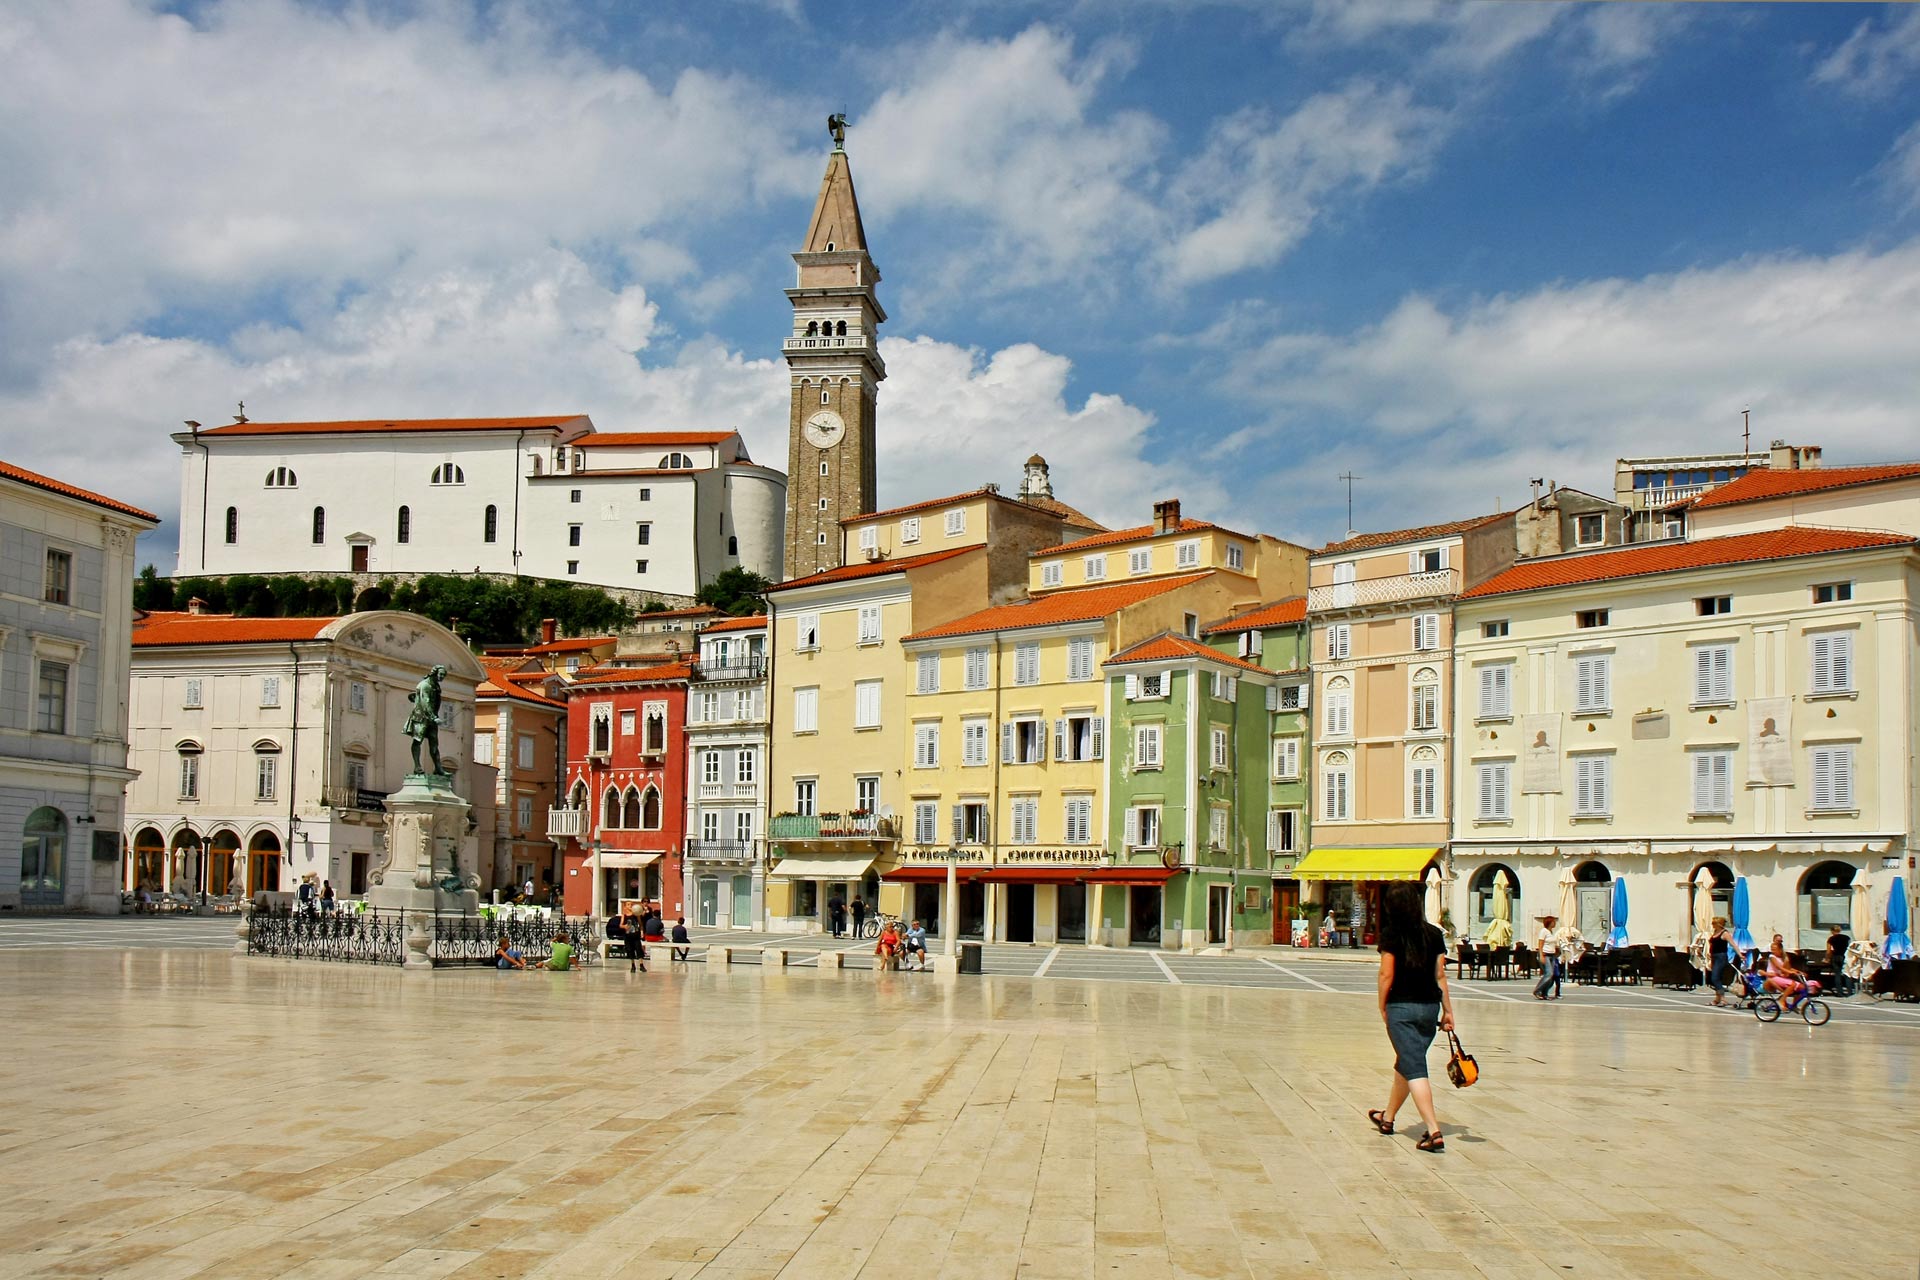 Tartini Square and Statue of Giuseppe Tartini overlooked by the venetian belfry of Saint George cathedral, Piran, Slovenia